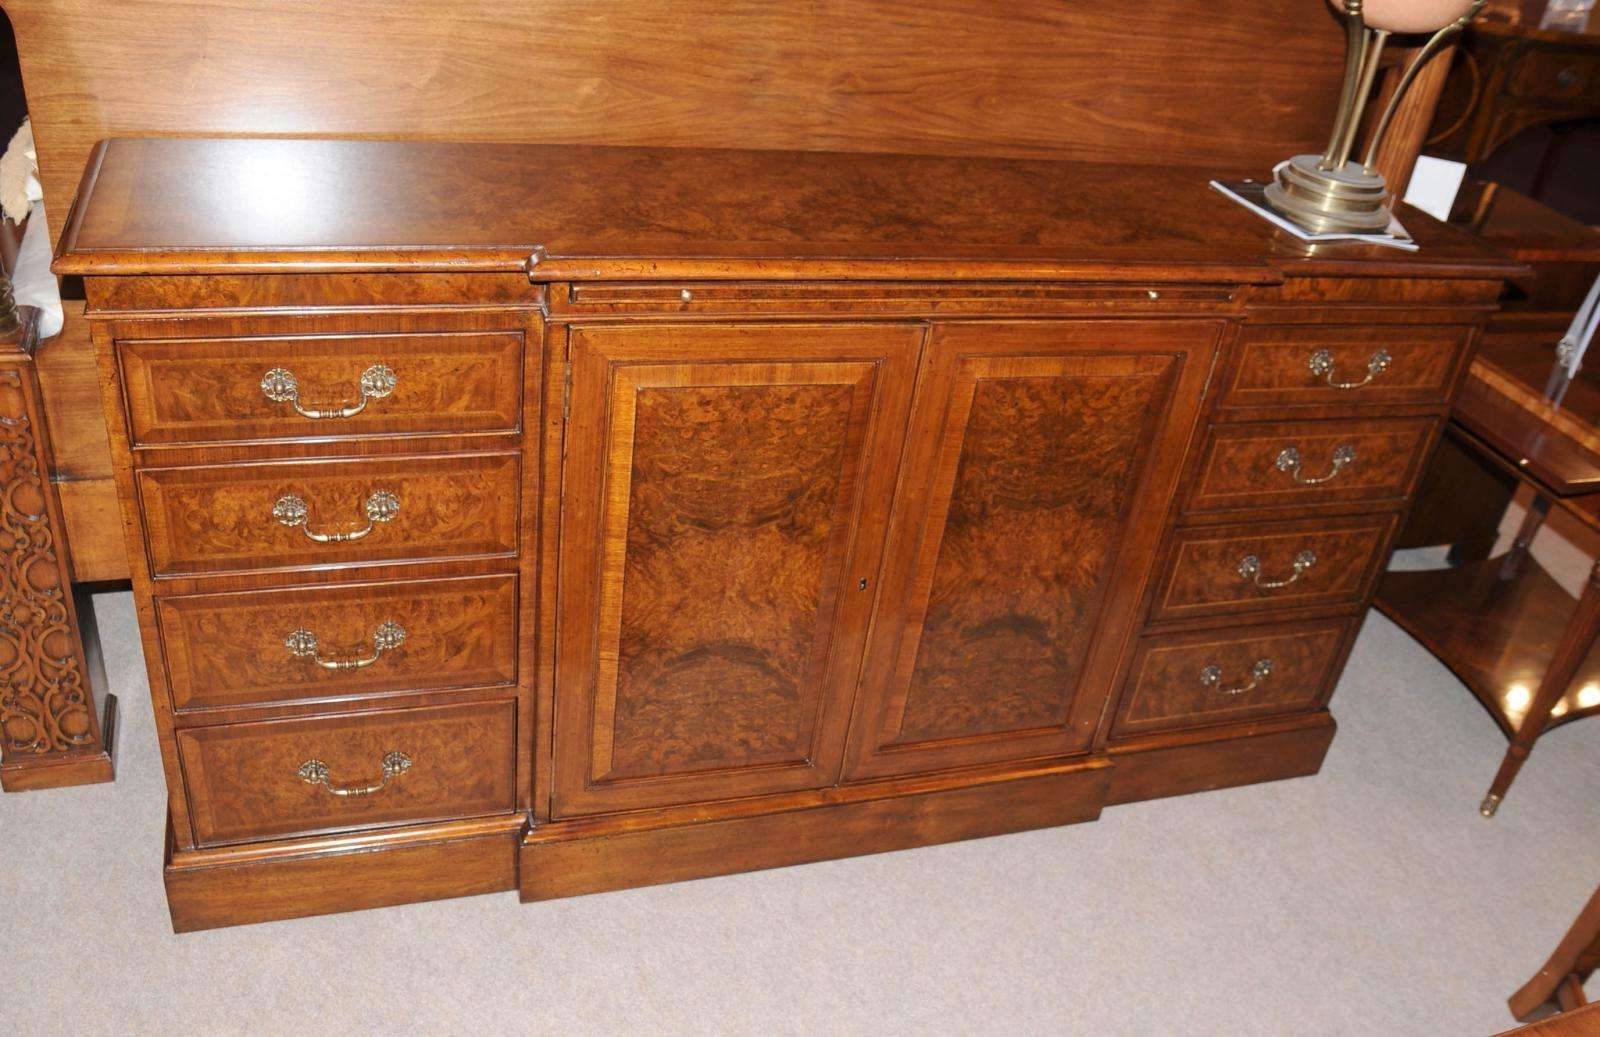 Edwardian Walnut Sideboard Buffet Server Dining Furniture | Ebay Pertaining To Buffet Servers And Sideboards (View 3 of 20)